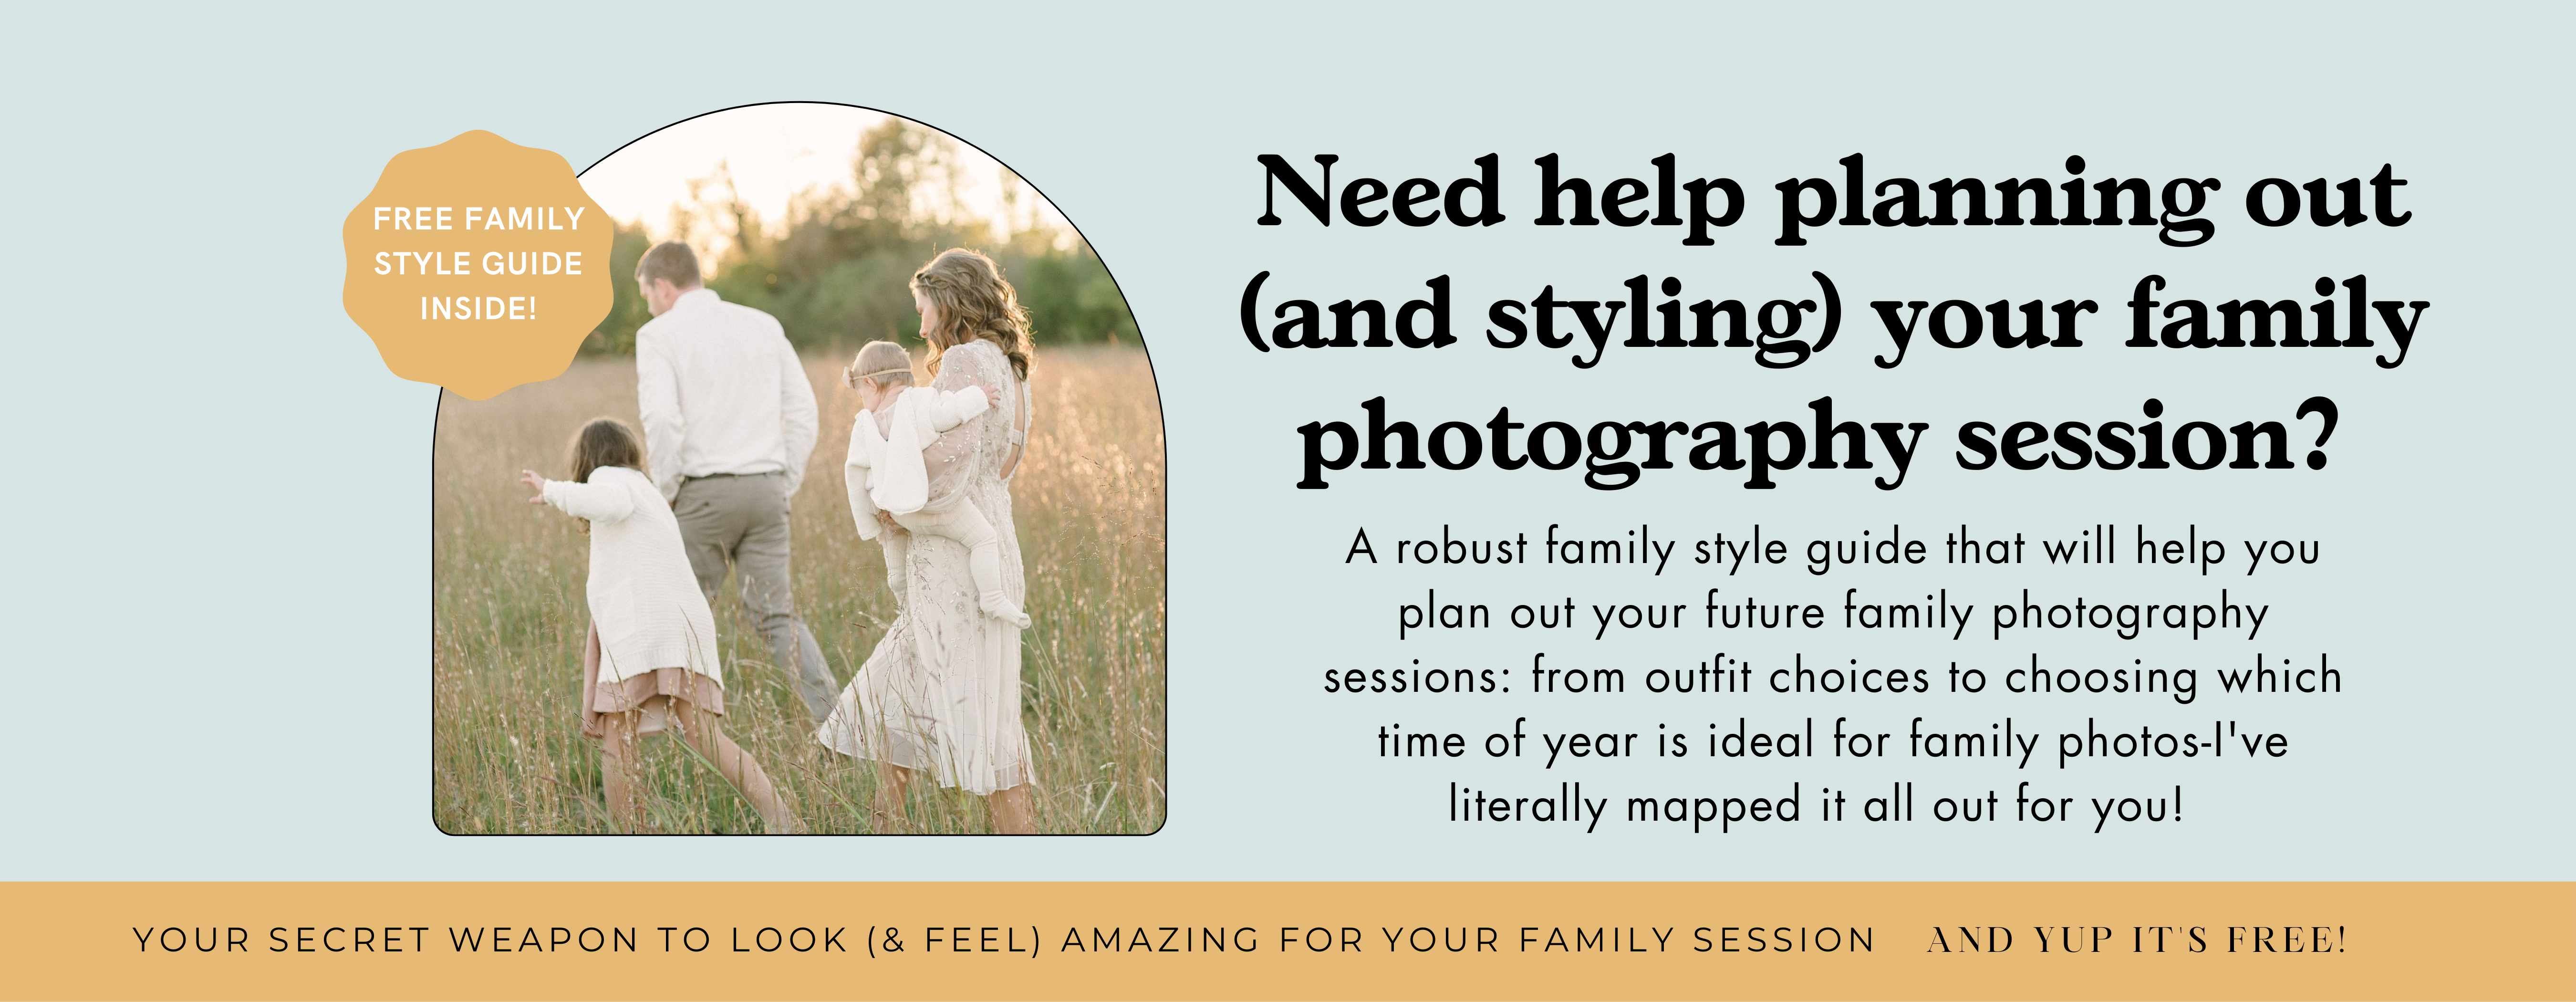 Family Portrait Session Style Guide from Dolly DeLong